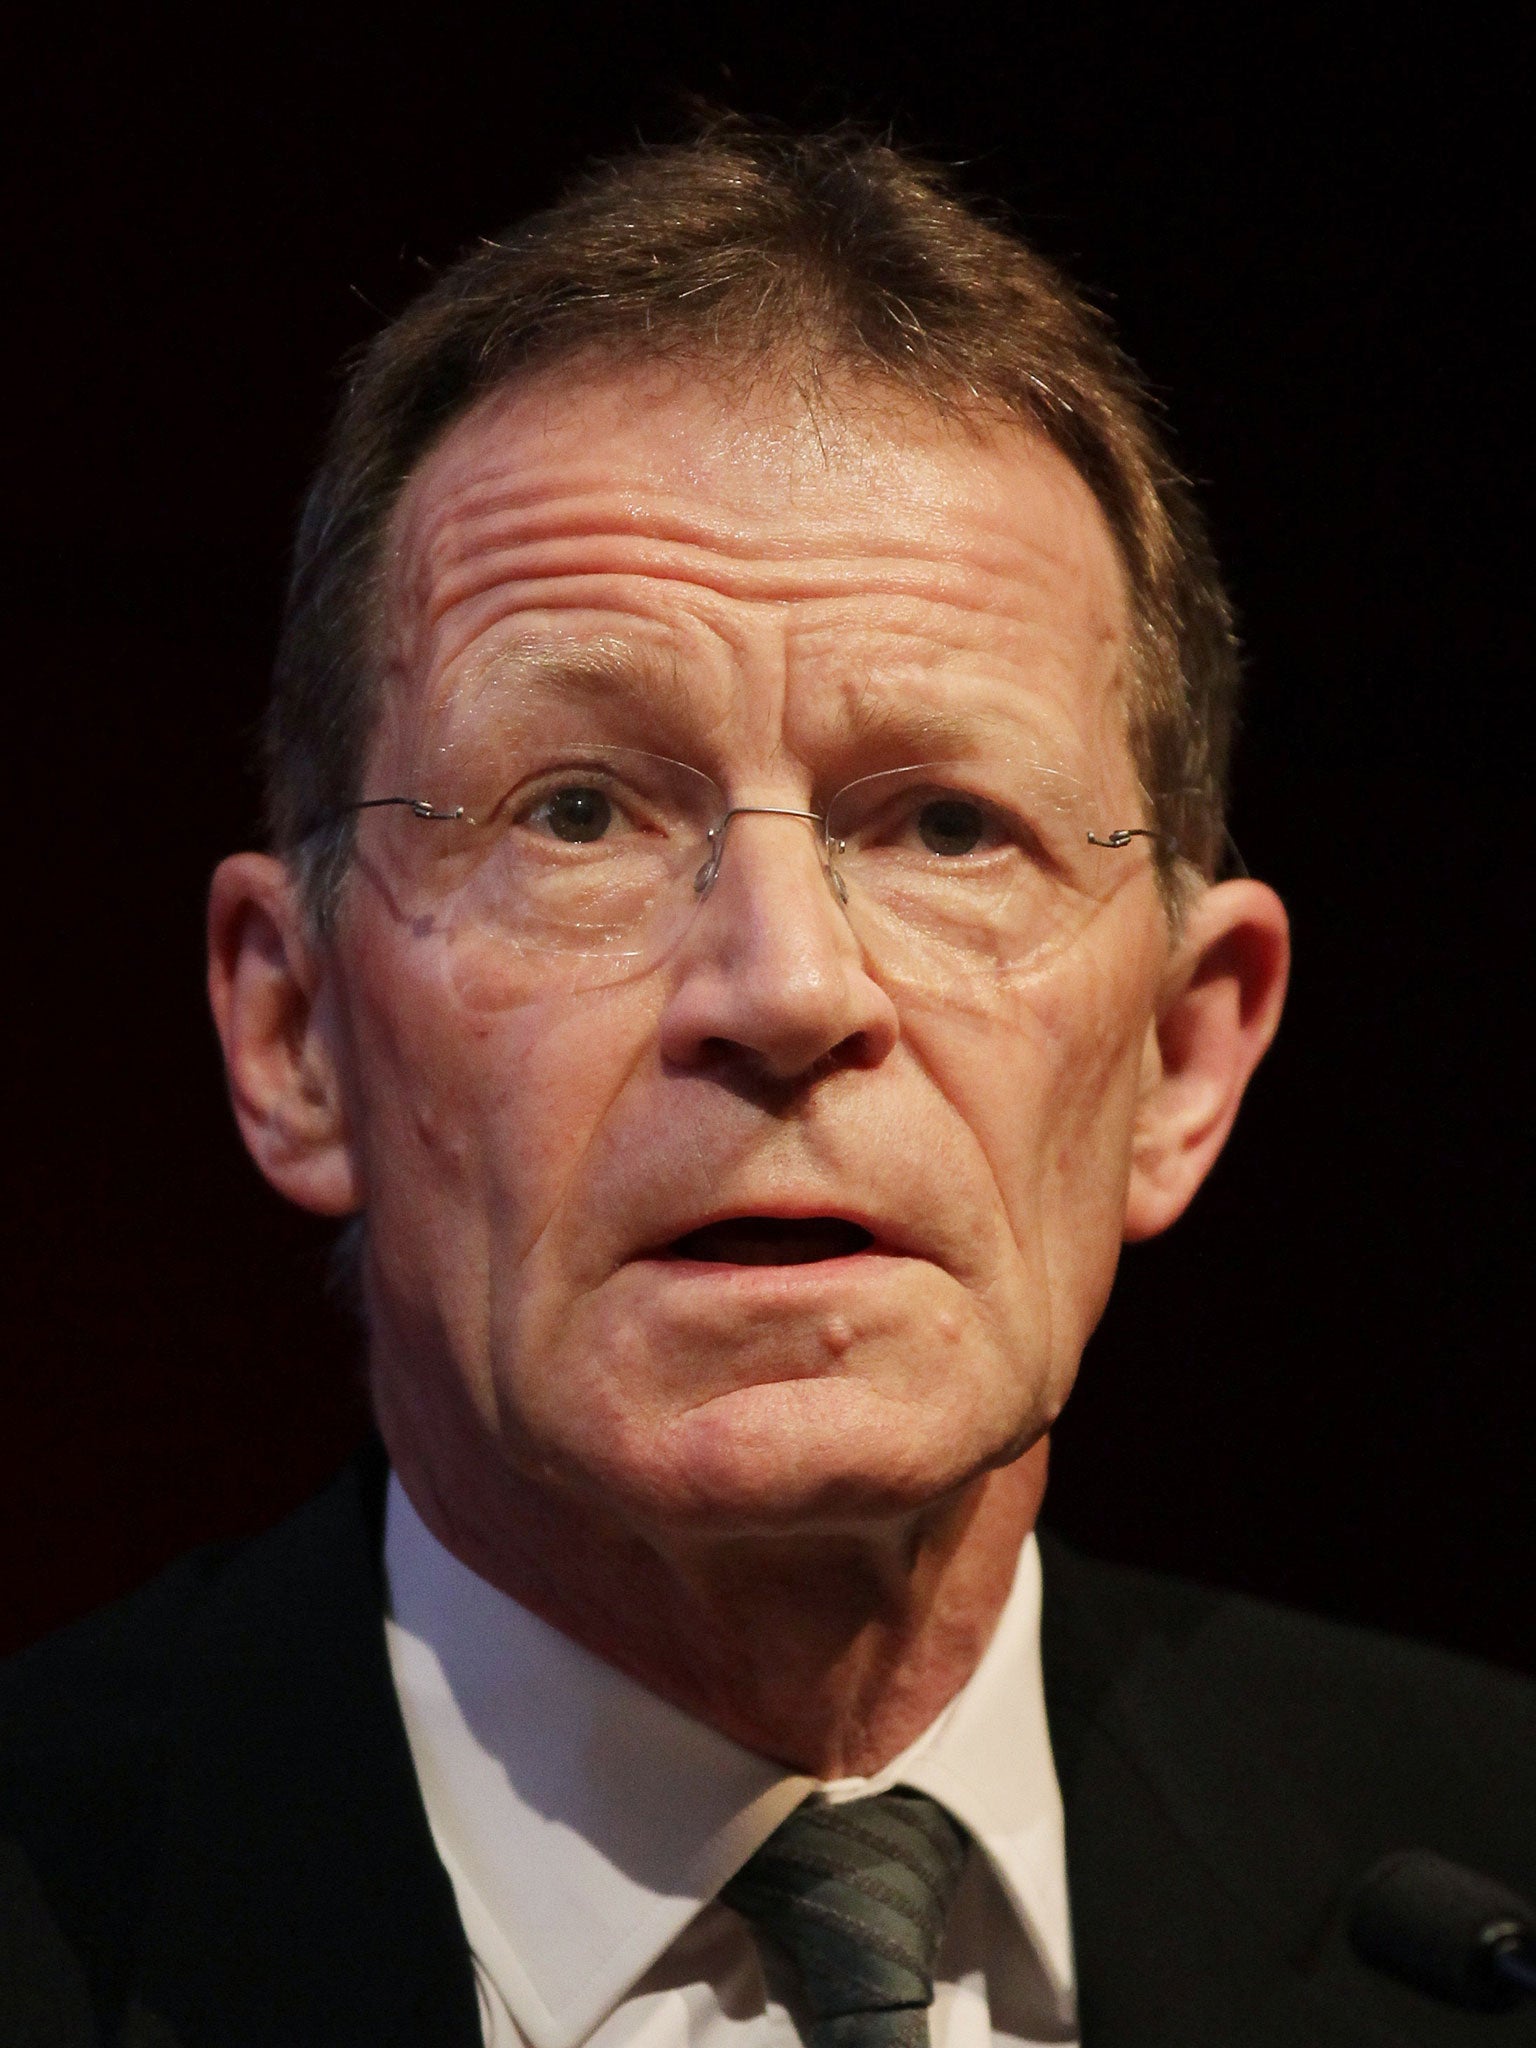 Nicholas Serota: The director of the Tate warned that creative freedoms are being usurped by legal fears